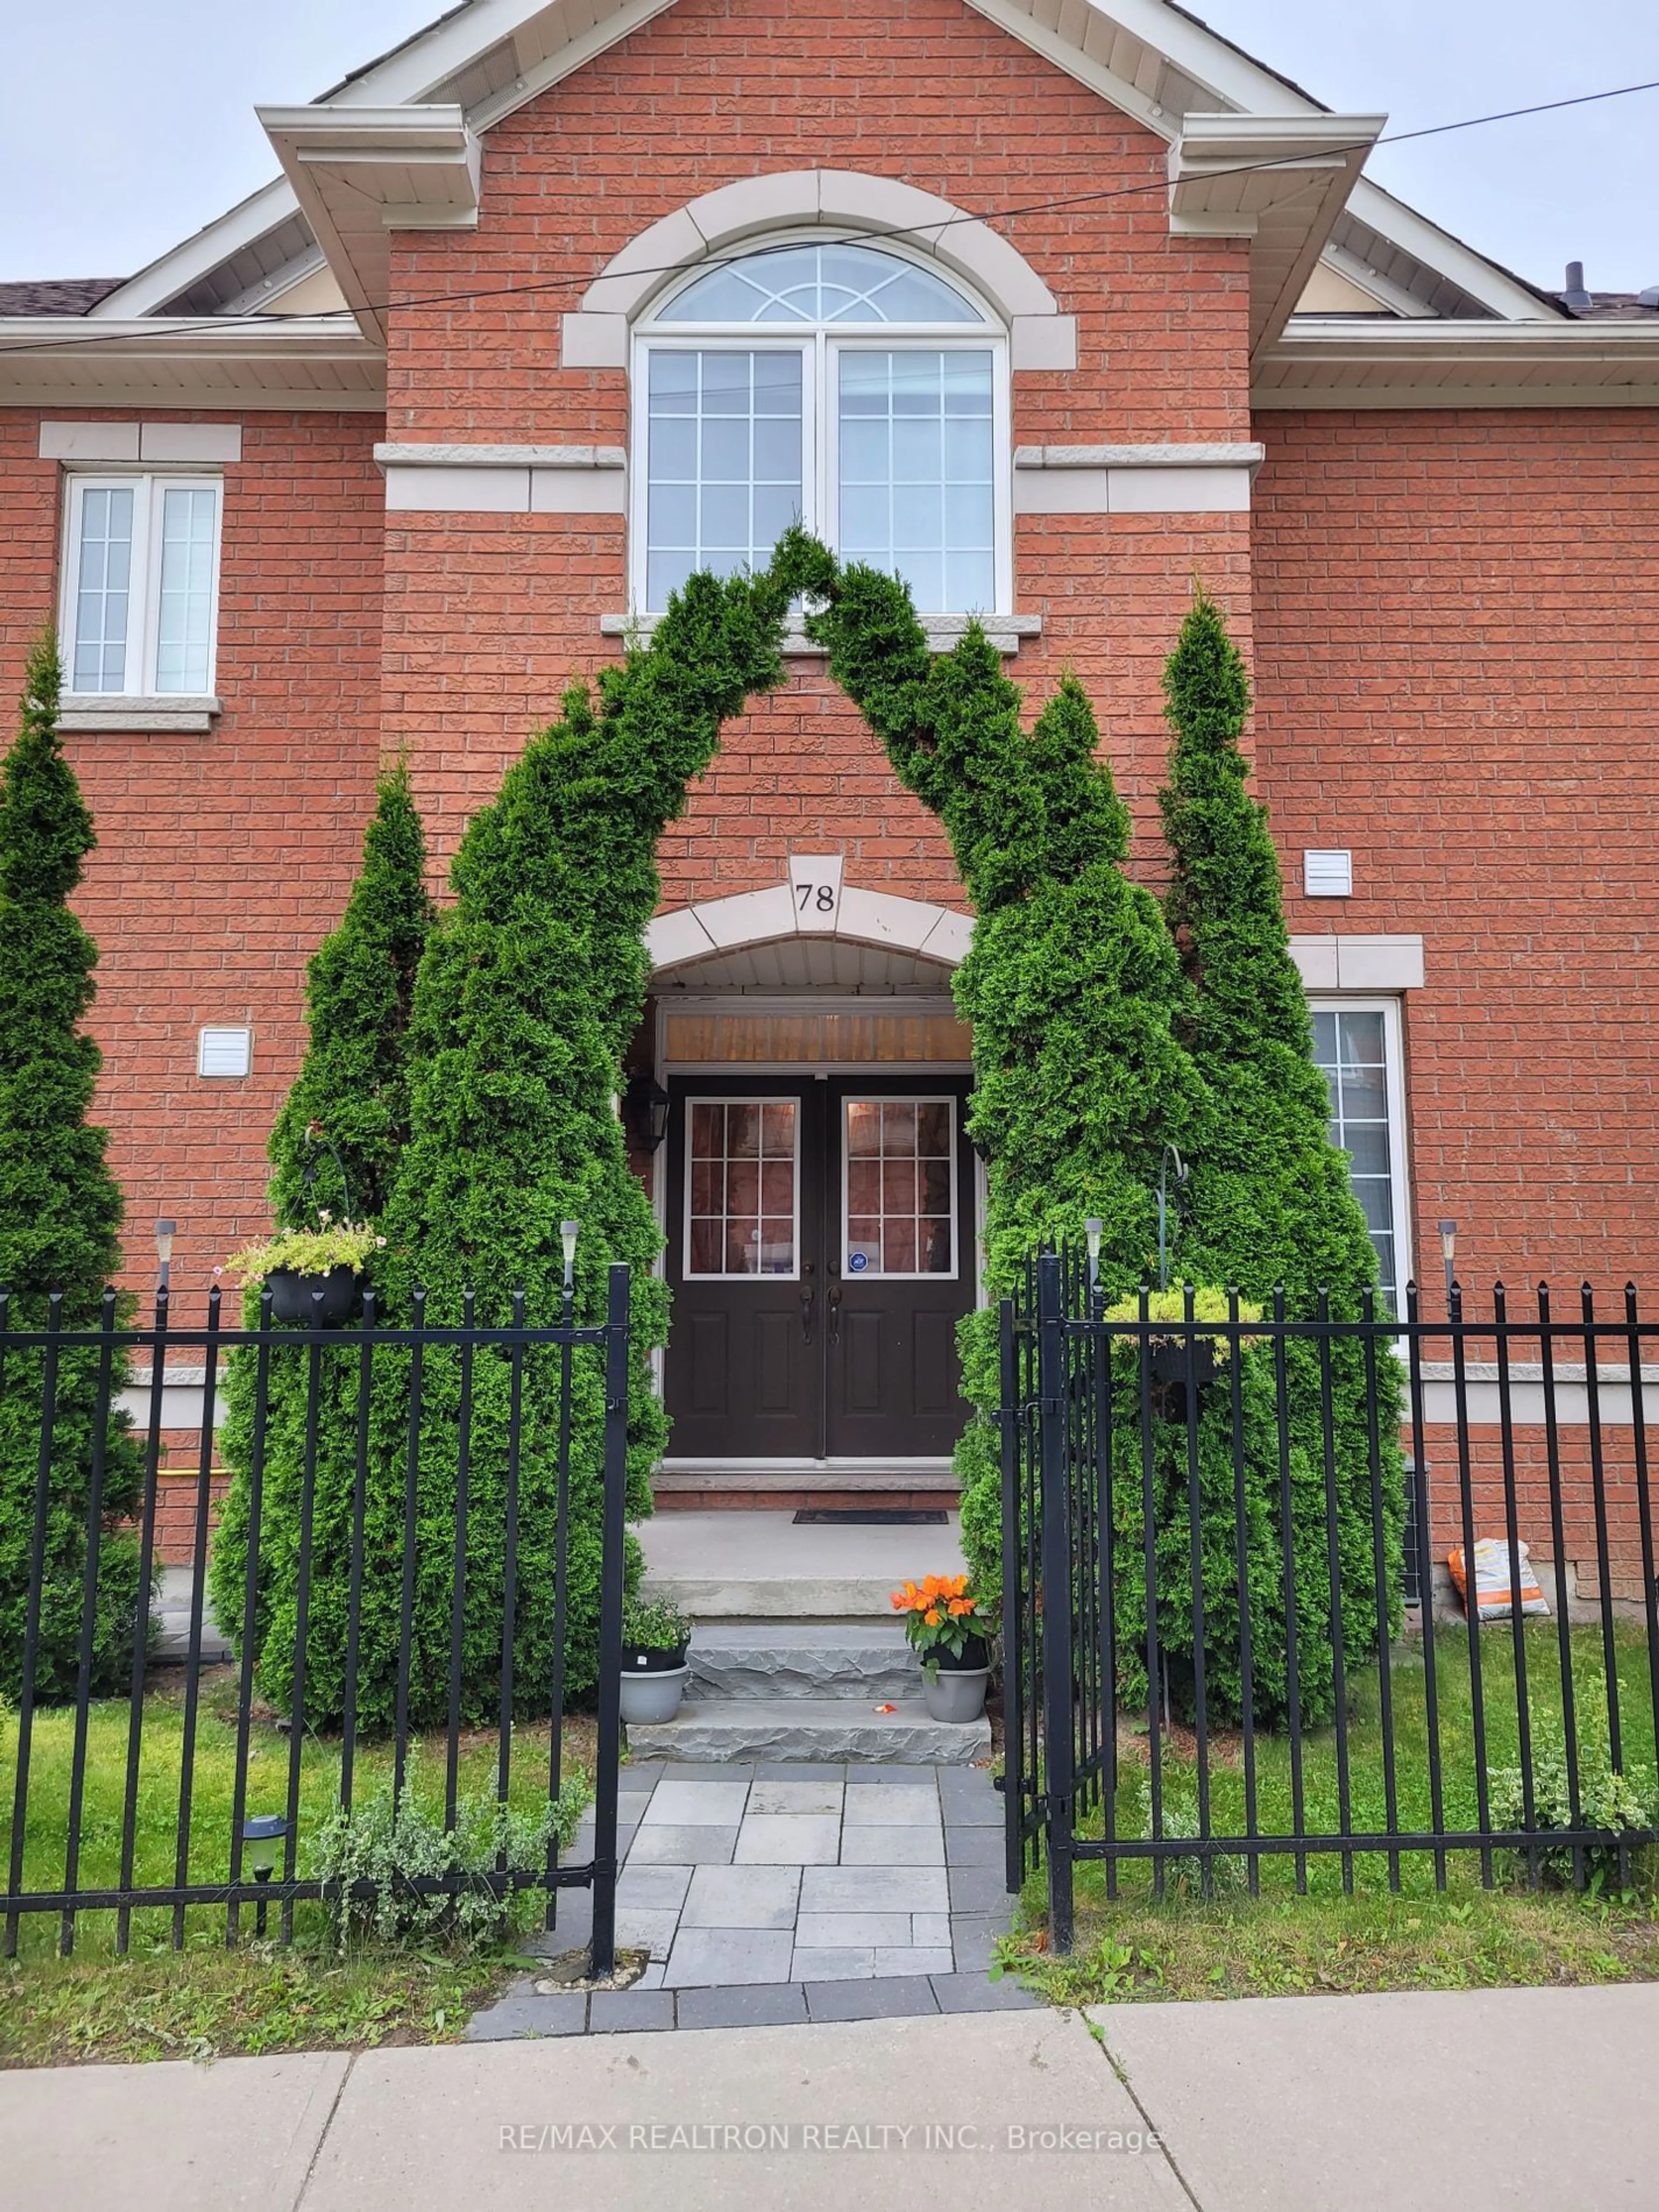 Home with brick exterior material for 8 Townwood Dr #78, Richmond Hill Ontario L4E 4Y3